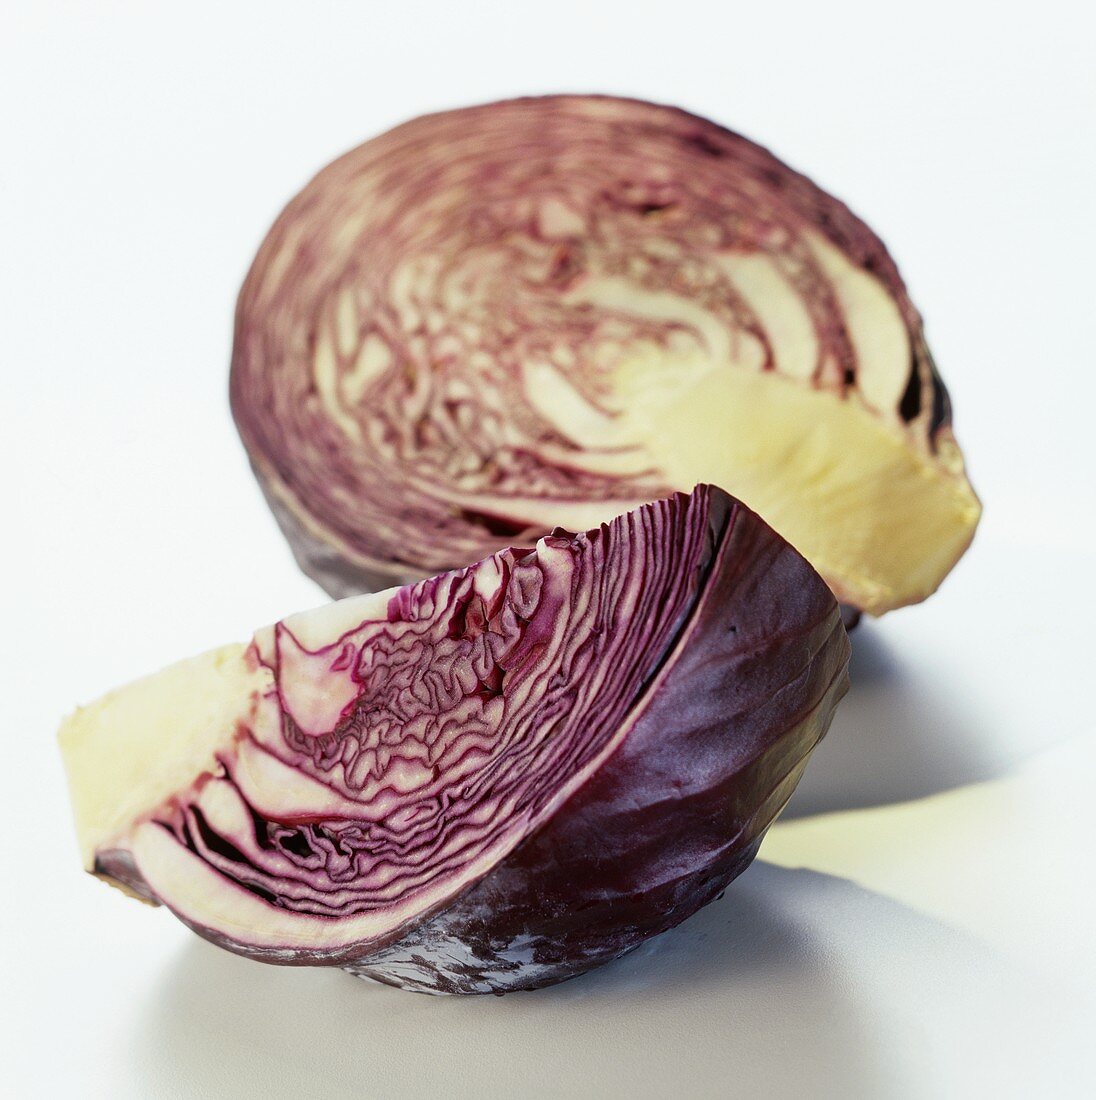 A quarter of a red cabbage lying in front of half a cabbage